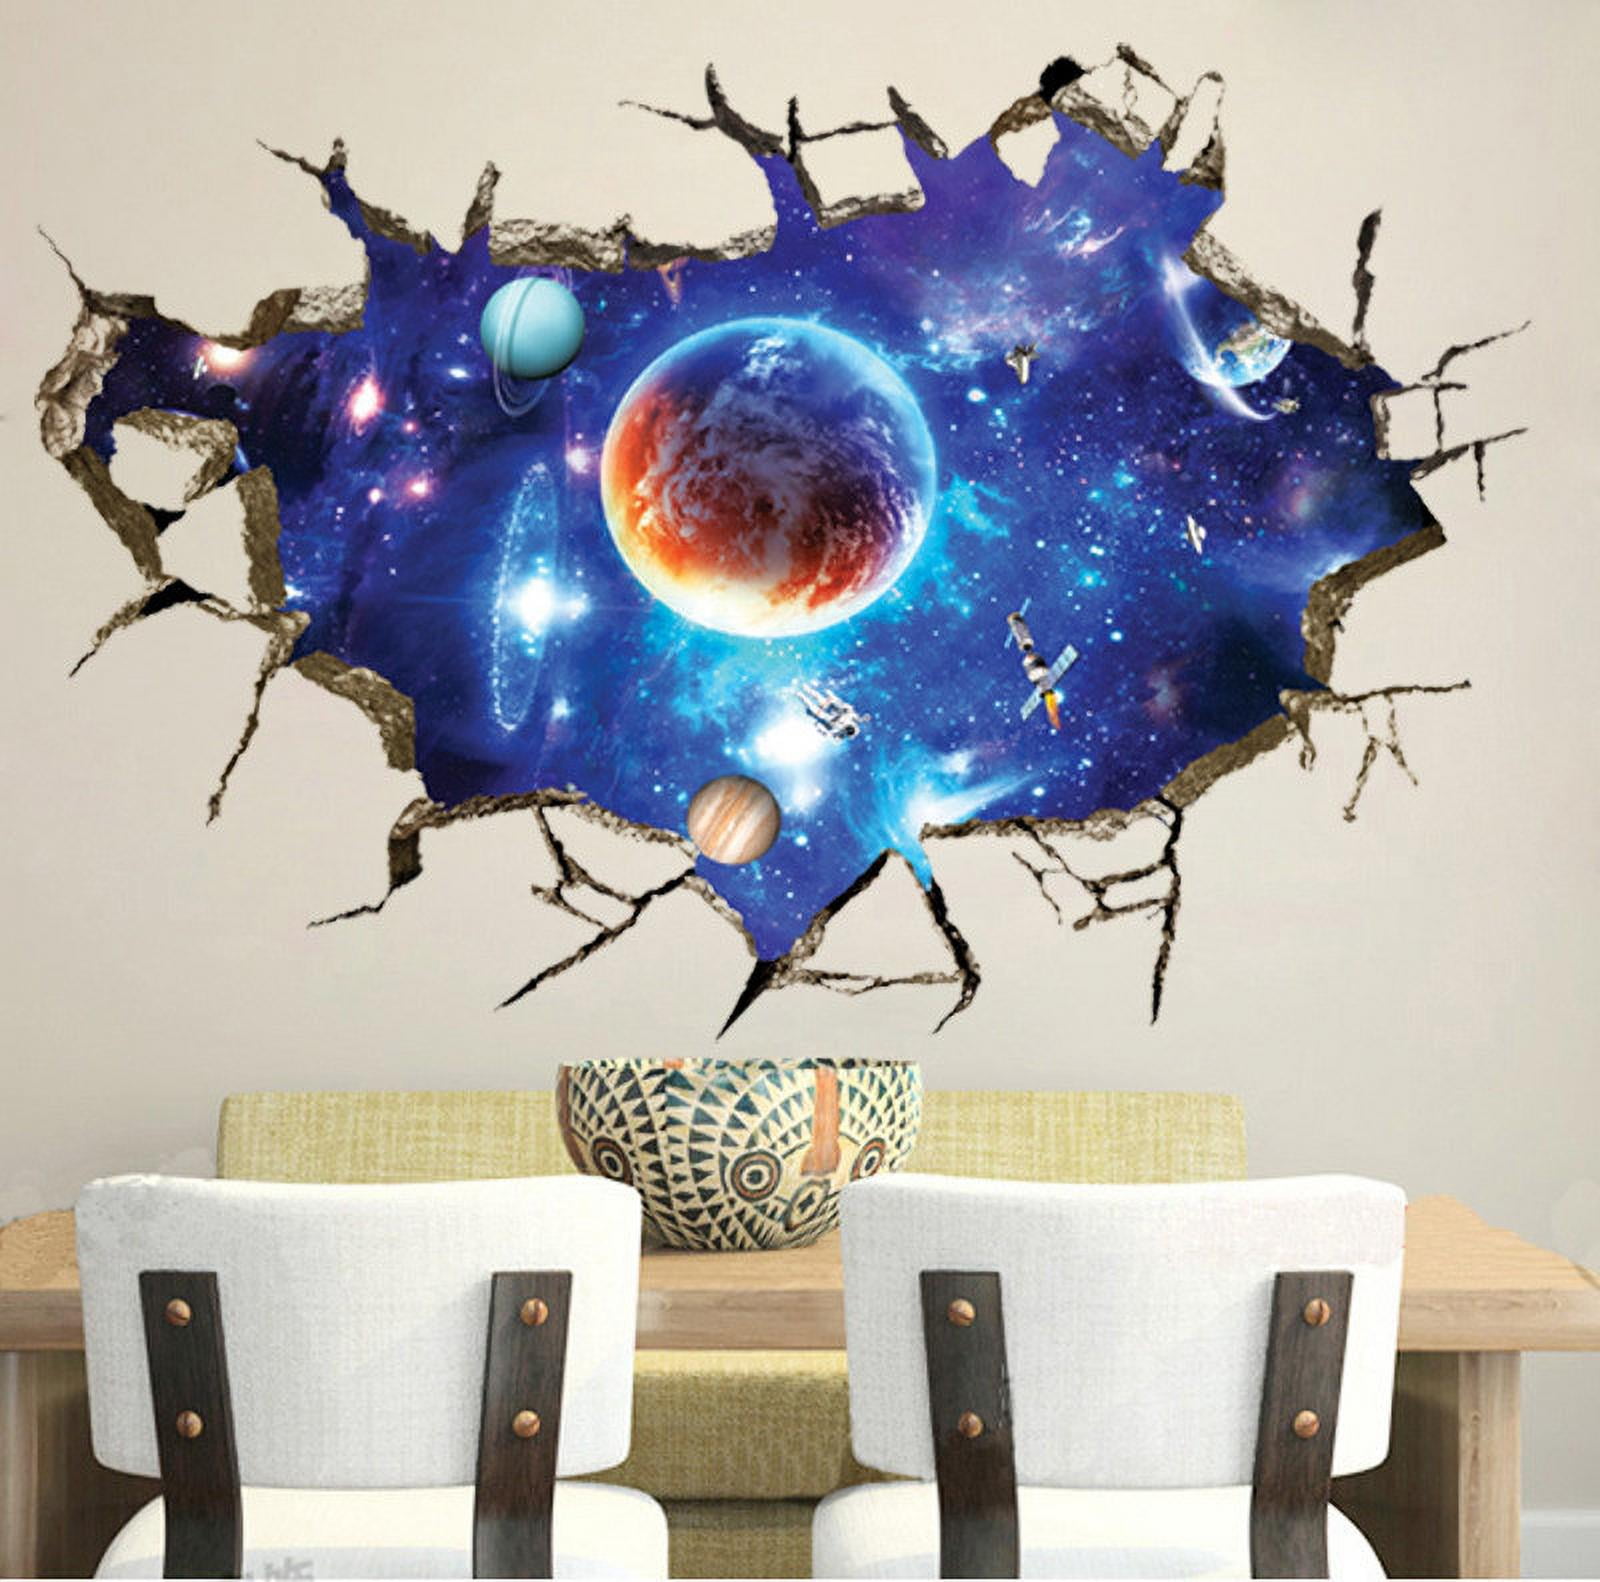 Wall Stickers Earth Space Moon Planet Boys Bedroom Smashed Decal 3D Art 